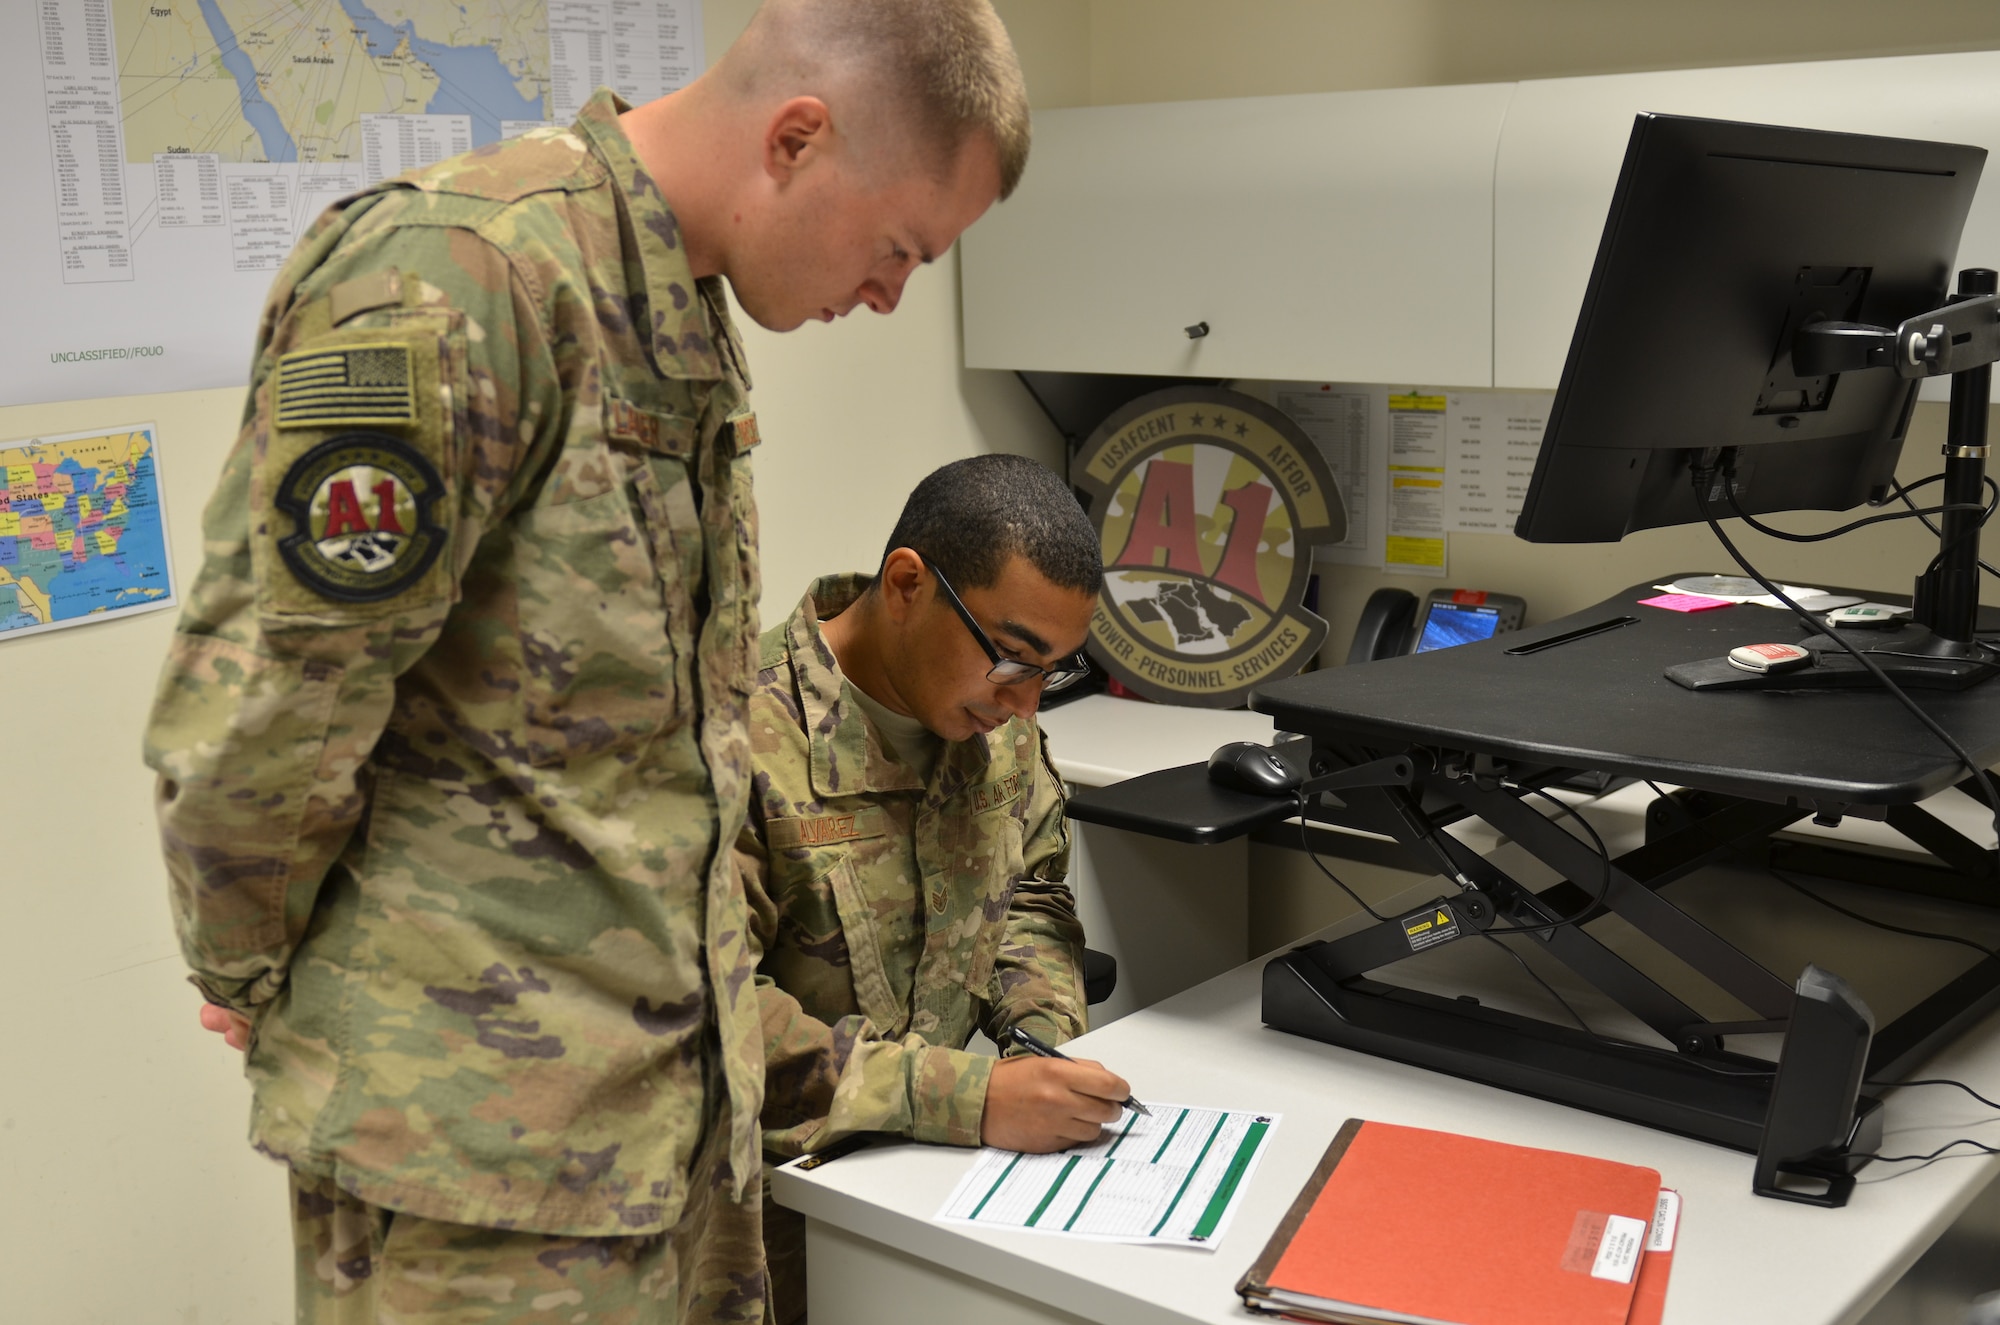 Senior Airman Joshua Glazier, U.S. Air Force Central Command deliberate and crisis action planning and execution segment operator, and Staff Sgt. Eric Alvarez, AFCENT personnel operator, review pre-deployment checklists at Al Udeid Air Base, Qatar, June 12, 2018. Manpower, Personnel and Services Directorate (A1) recently reduced the length of pre-deployment checklists in order to reduce redundancy and give more time for Airmen to spend with their families. (U.S. Air Force photo by Staff Sgt. Caitlin Conner)